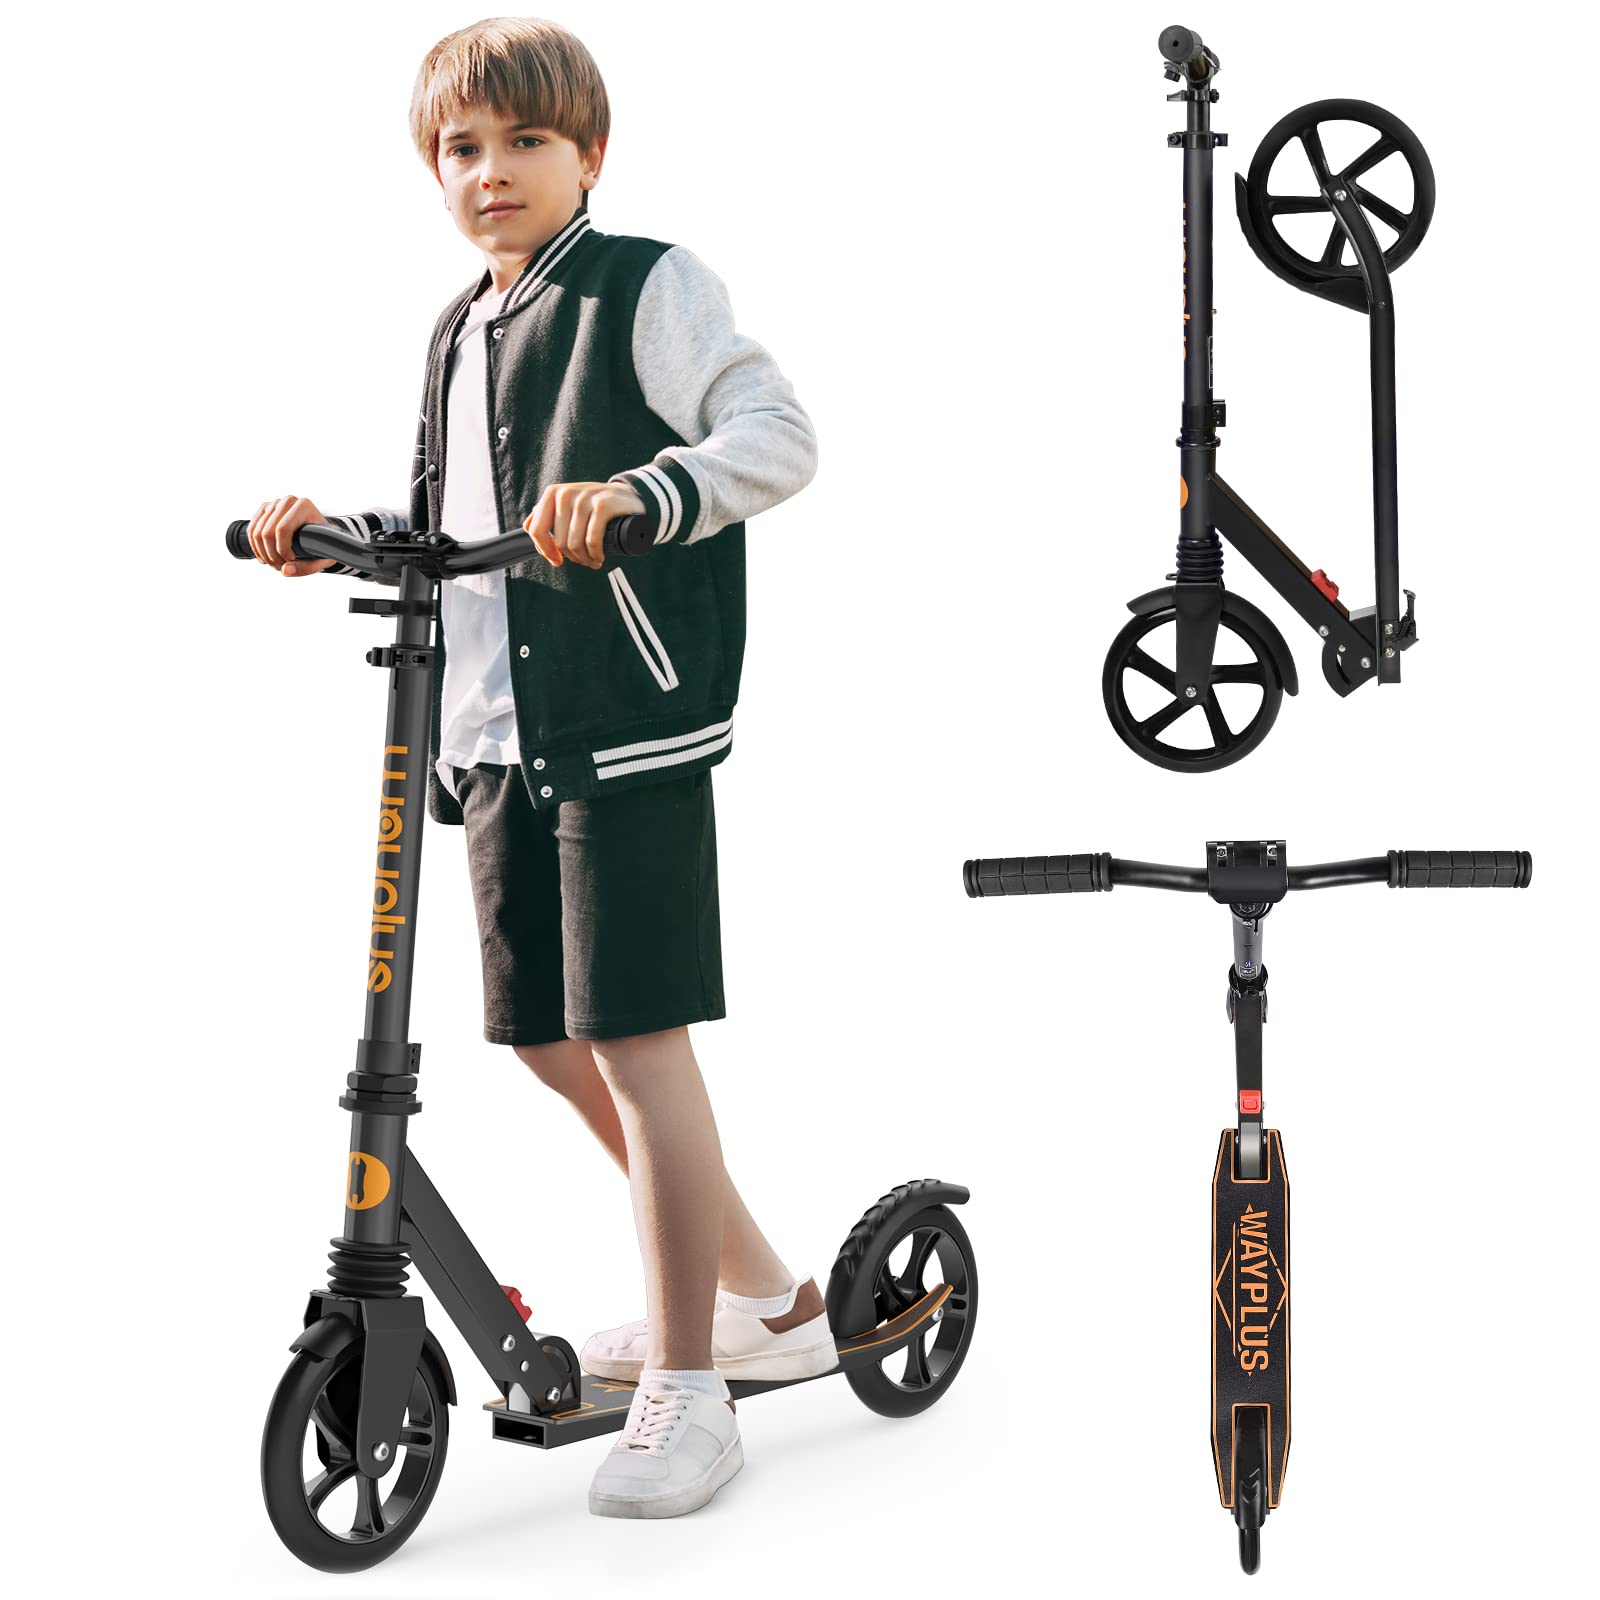 Wayplus Kick Scooter For Ages 6,Kid, Teens Adults Max Load 240 Lbs Foldable, Lightweight, 8In Big Wheels For Kids, Teen And Adul